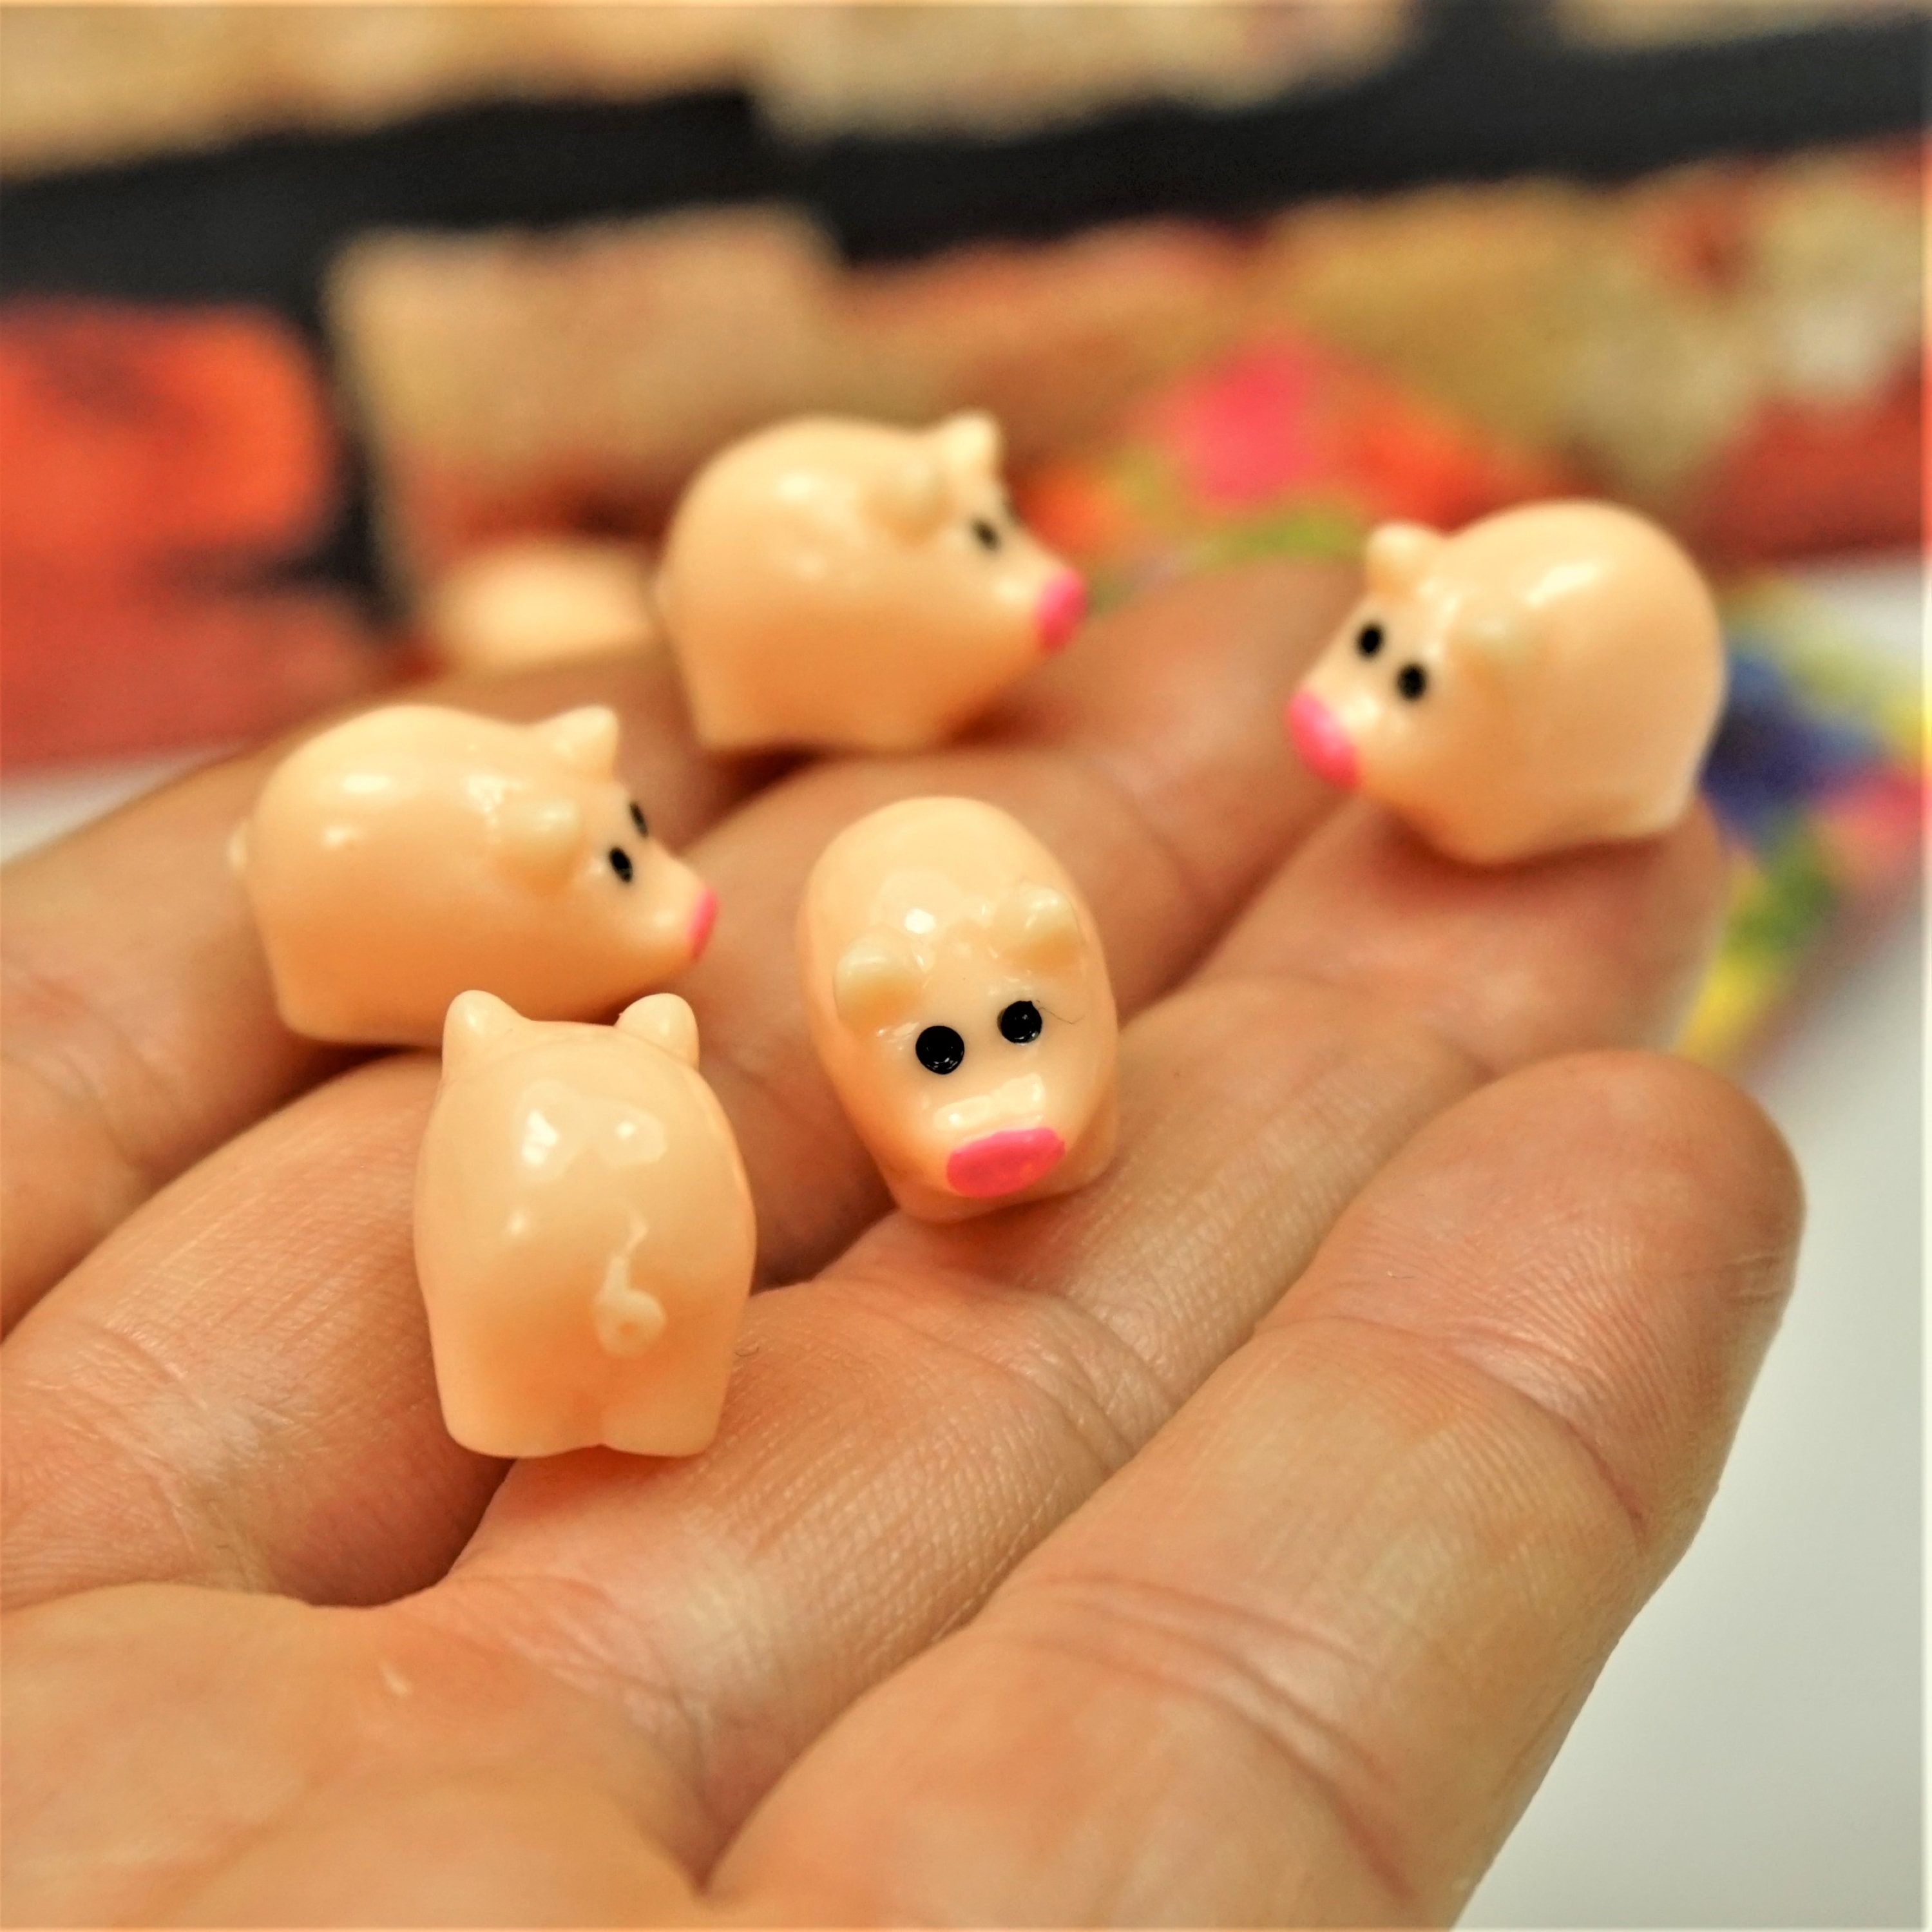 ARTIBETTER 4pcs Ornaments Mini Resin Pigs Tiny Pig Toy Pig Figurines  Collectibles Resin Animal Ornament Yard Piggy Figurine Desktop Pig Mini  Resin